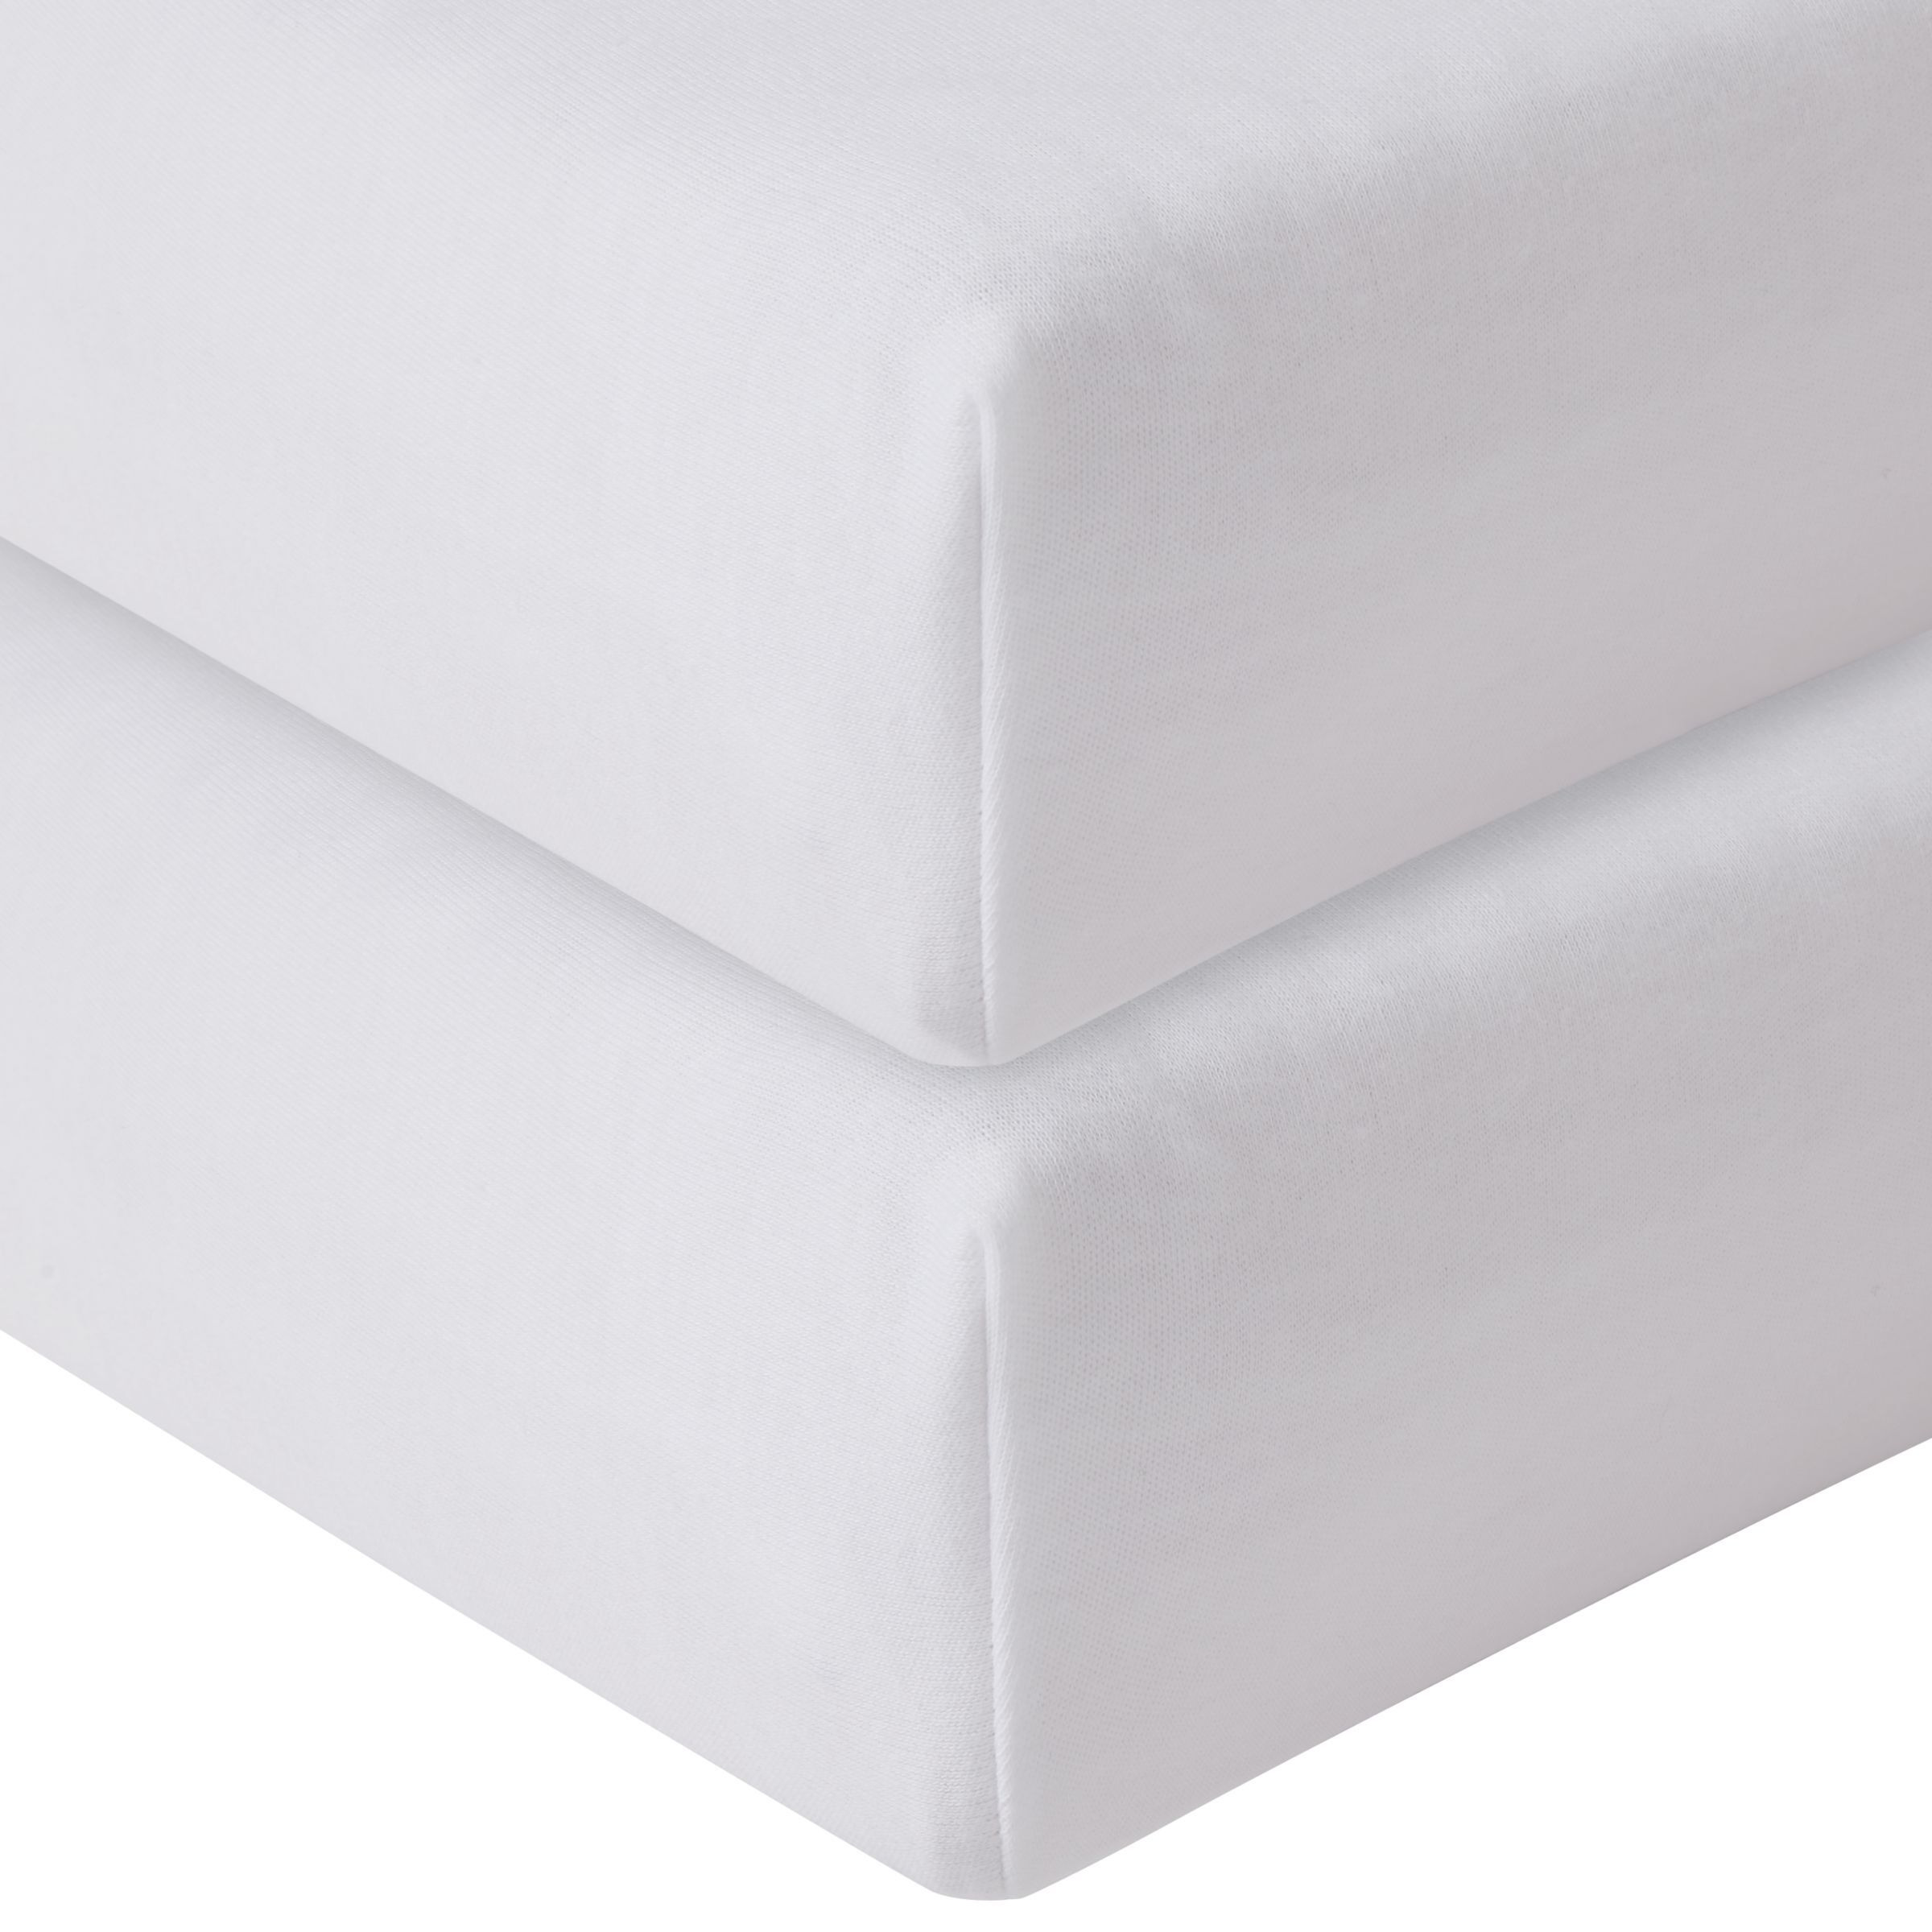 John Lewis Seconds GOTS Organic Cotton Fitted Travel Cot Sheet, 75 x 105cm, Pack of 2, White - image 1